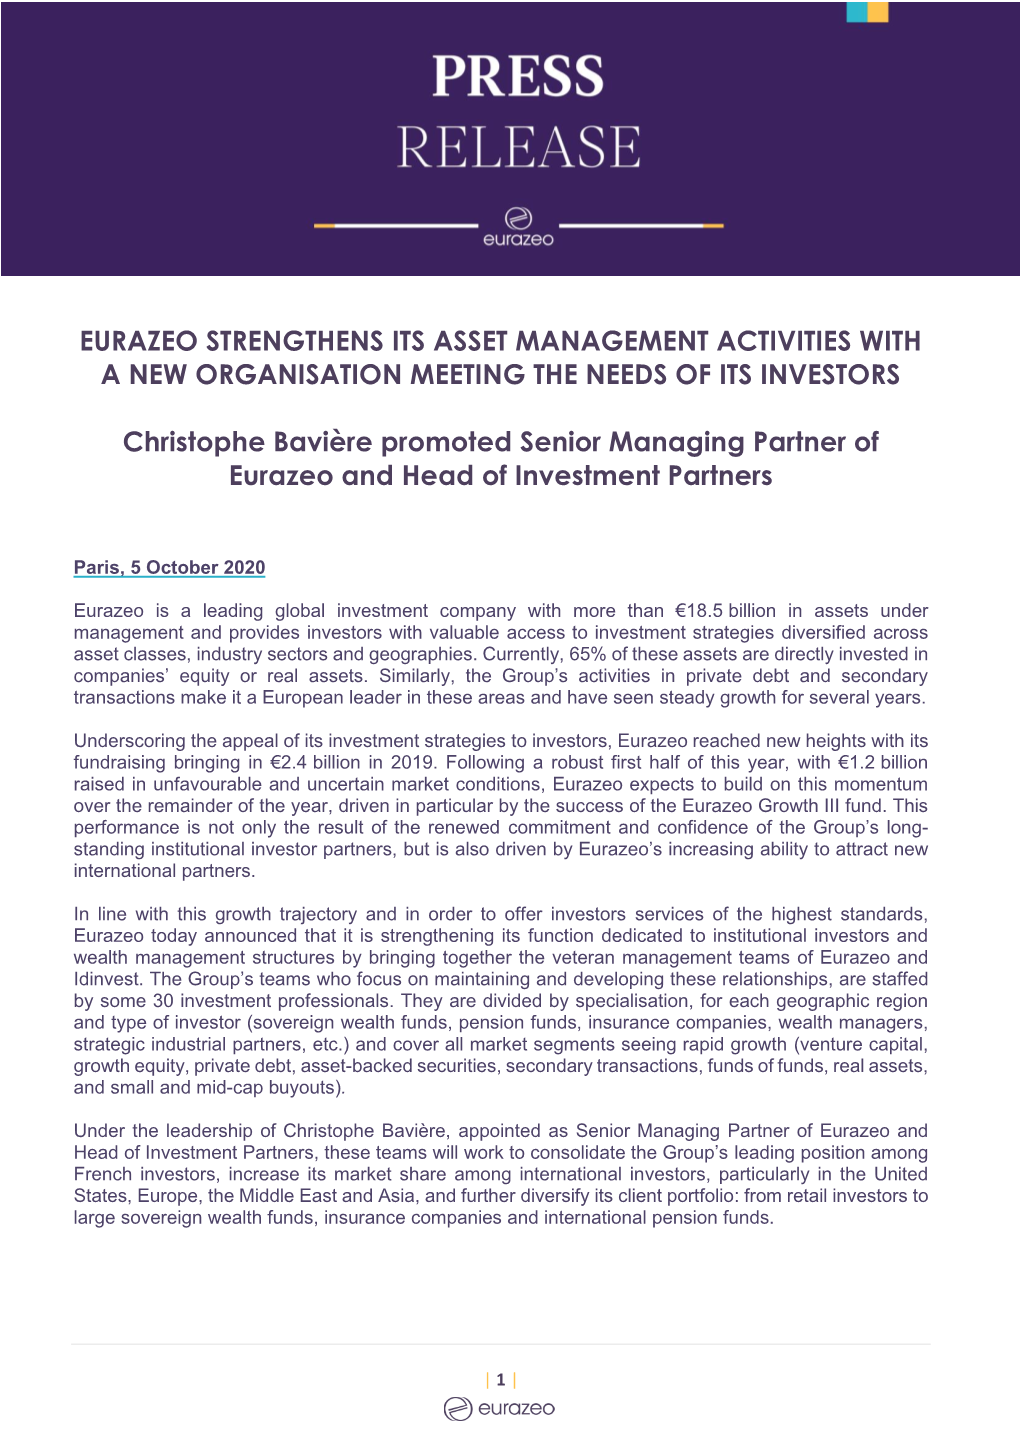 Eurazeo Strengthens Its Asset Management Activities with a New Organisation Meeting the Needs of Its Investors